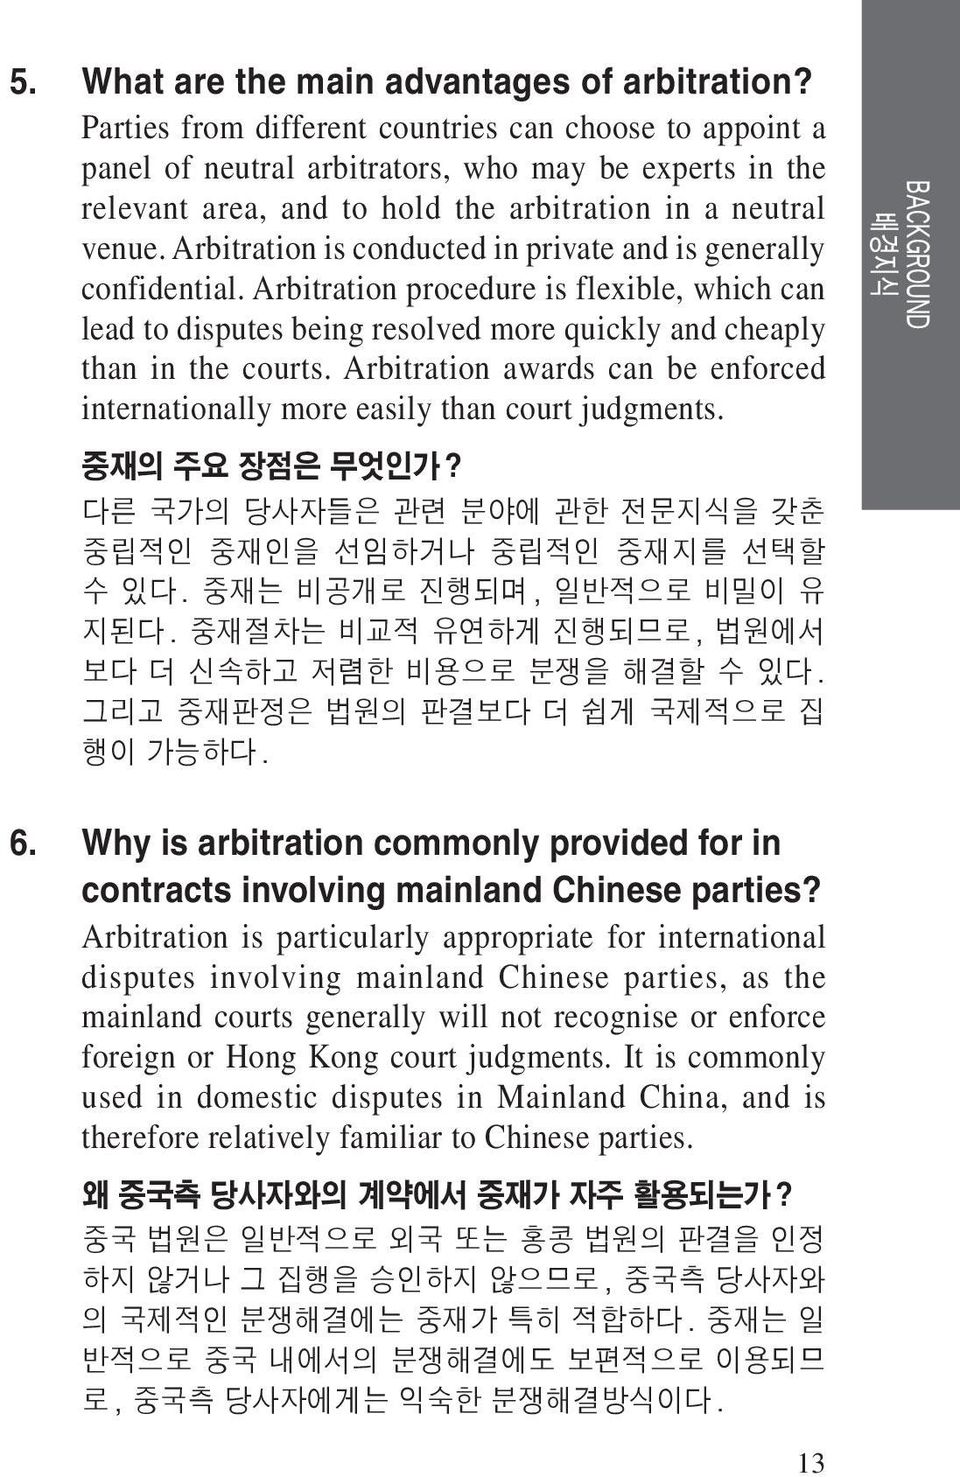 Arbitration is conducted in private and is generally confidential. Arbitration procedure is flexible, which can lead to disputes being resolved more quickly and cheaply than in the courts.